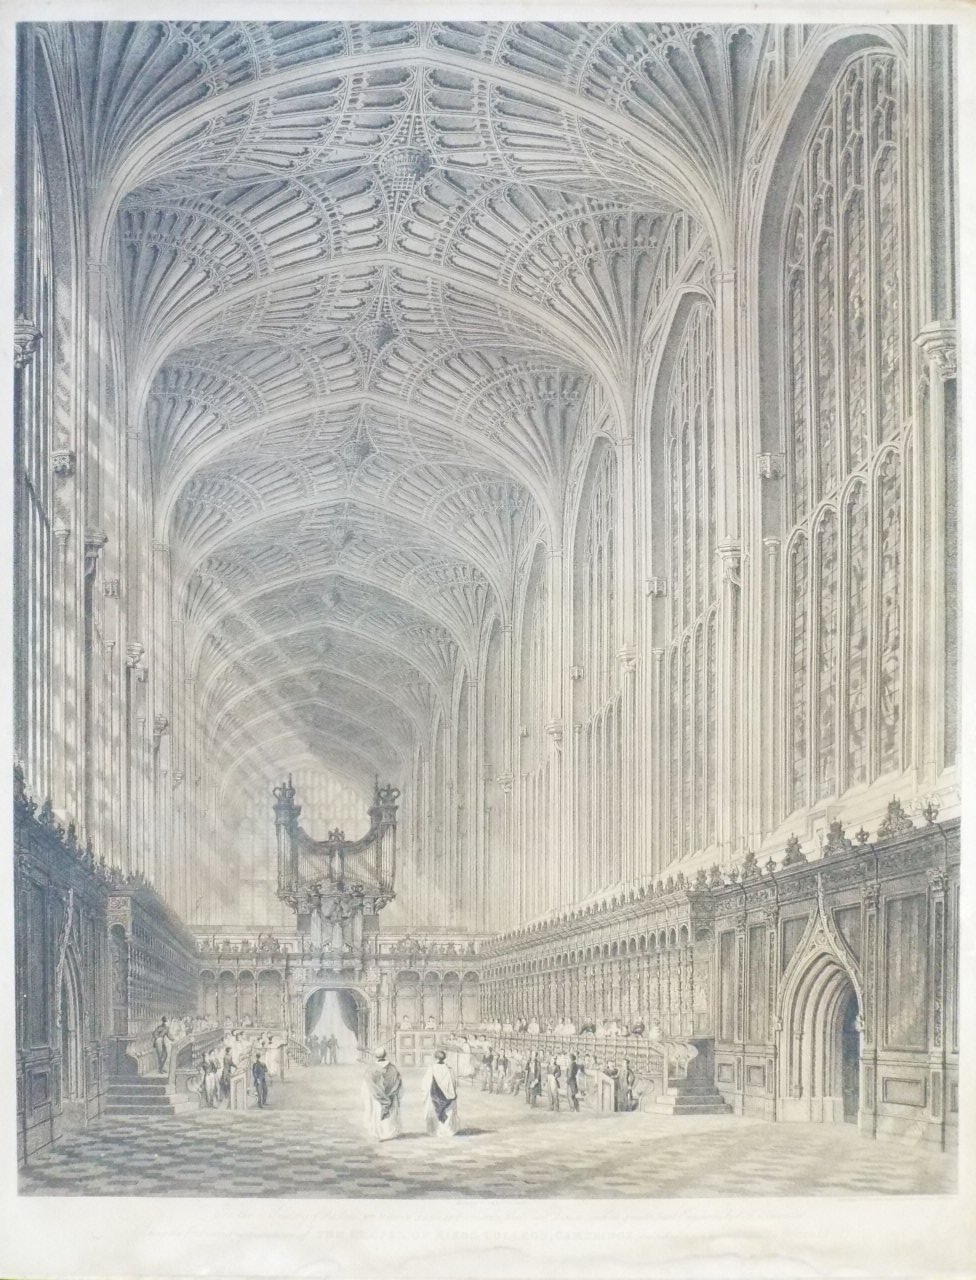 Print - To the Memory of the late Mr. Henry Sargant Storer, this View, Drawn and in greater part Engraved by him, is inscribed. Being the first representation of The Chapel of King's College, Cambridge, published since its completion by Henry VII. - Storer